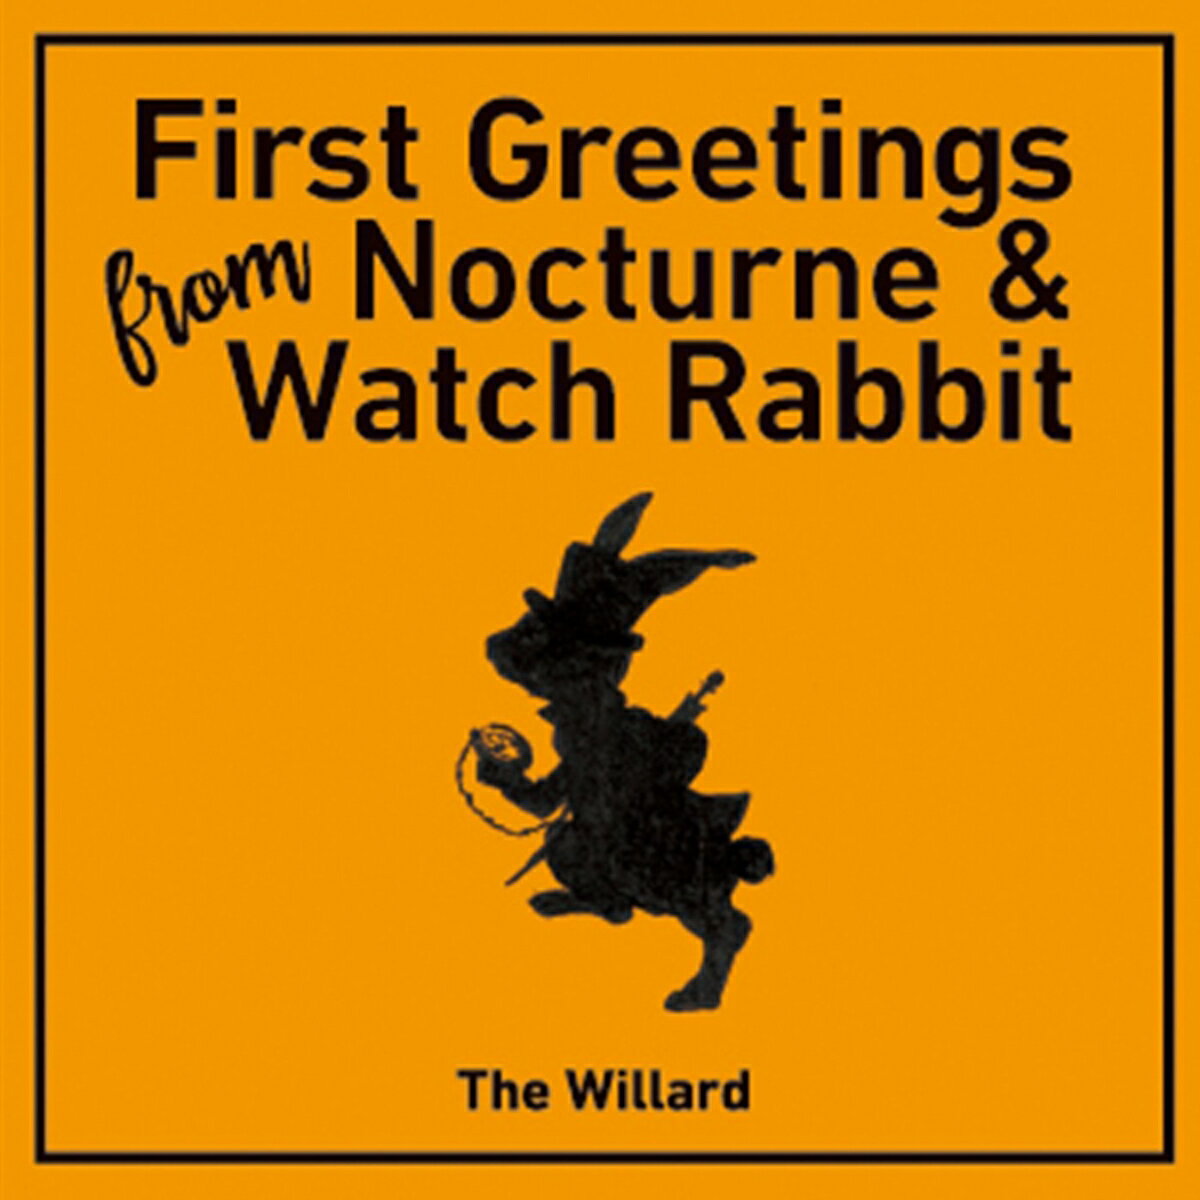 First Greetings From Nocturne Watch Rabbit The Willard